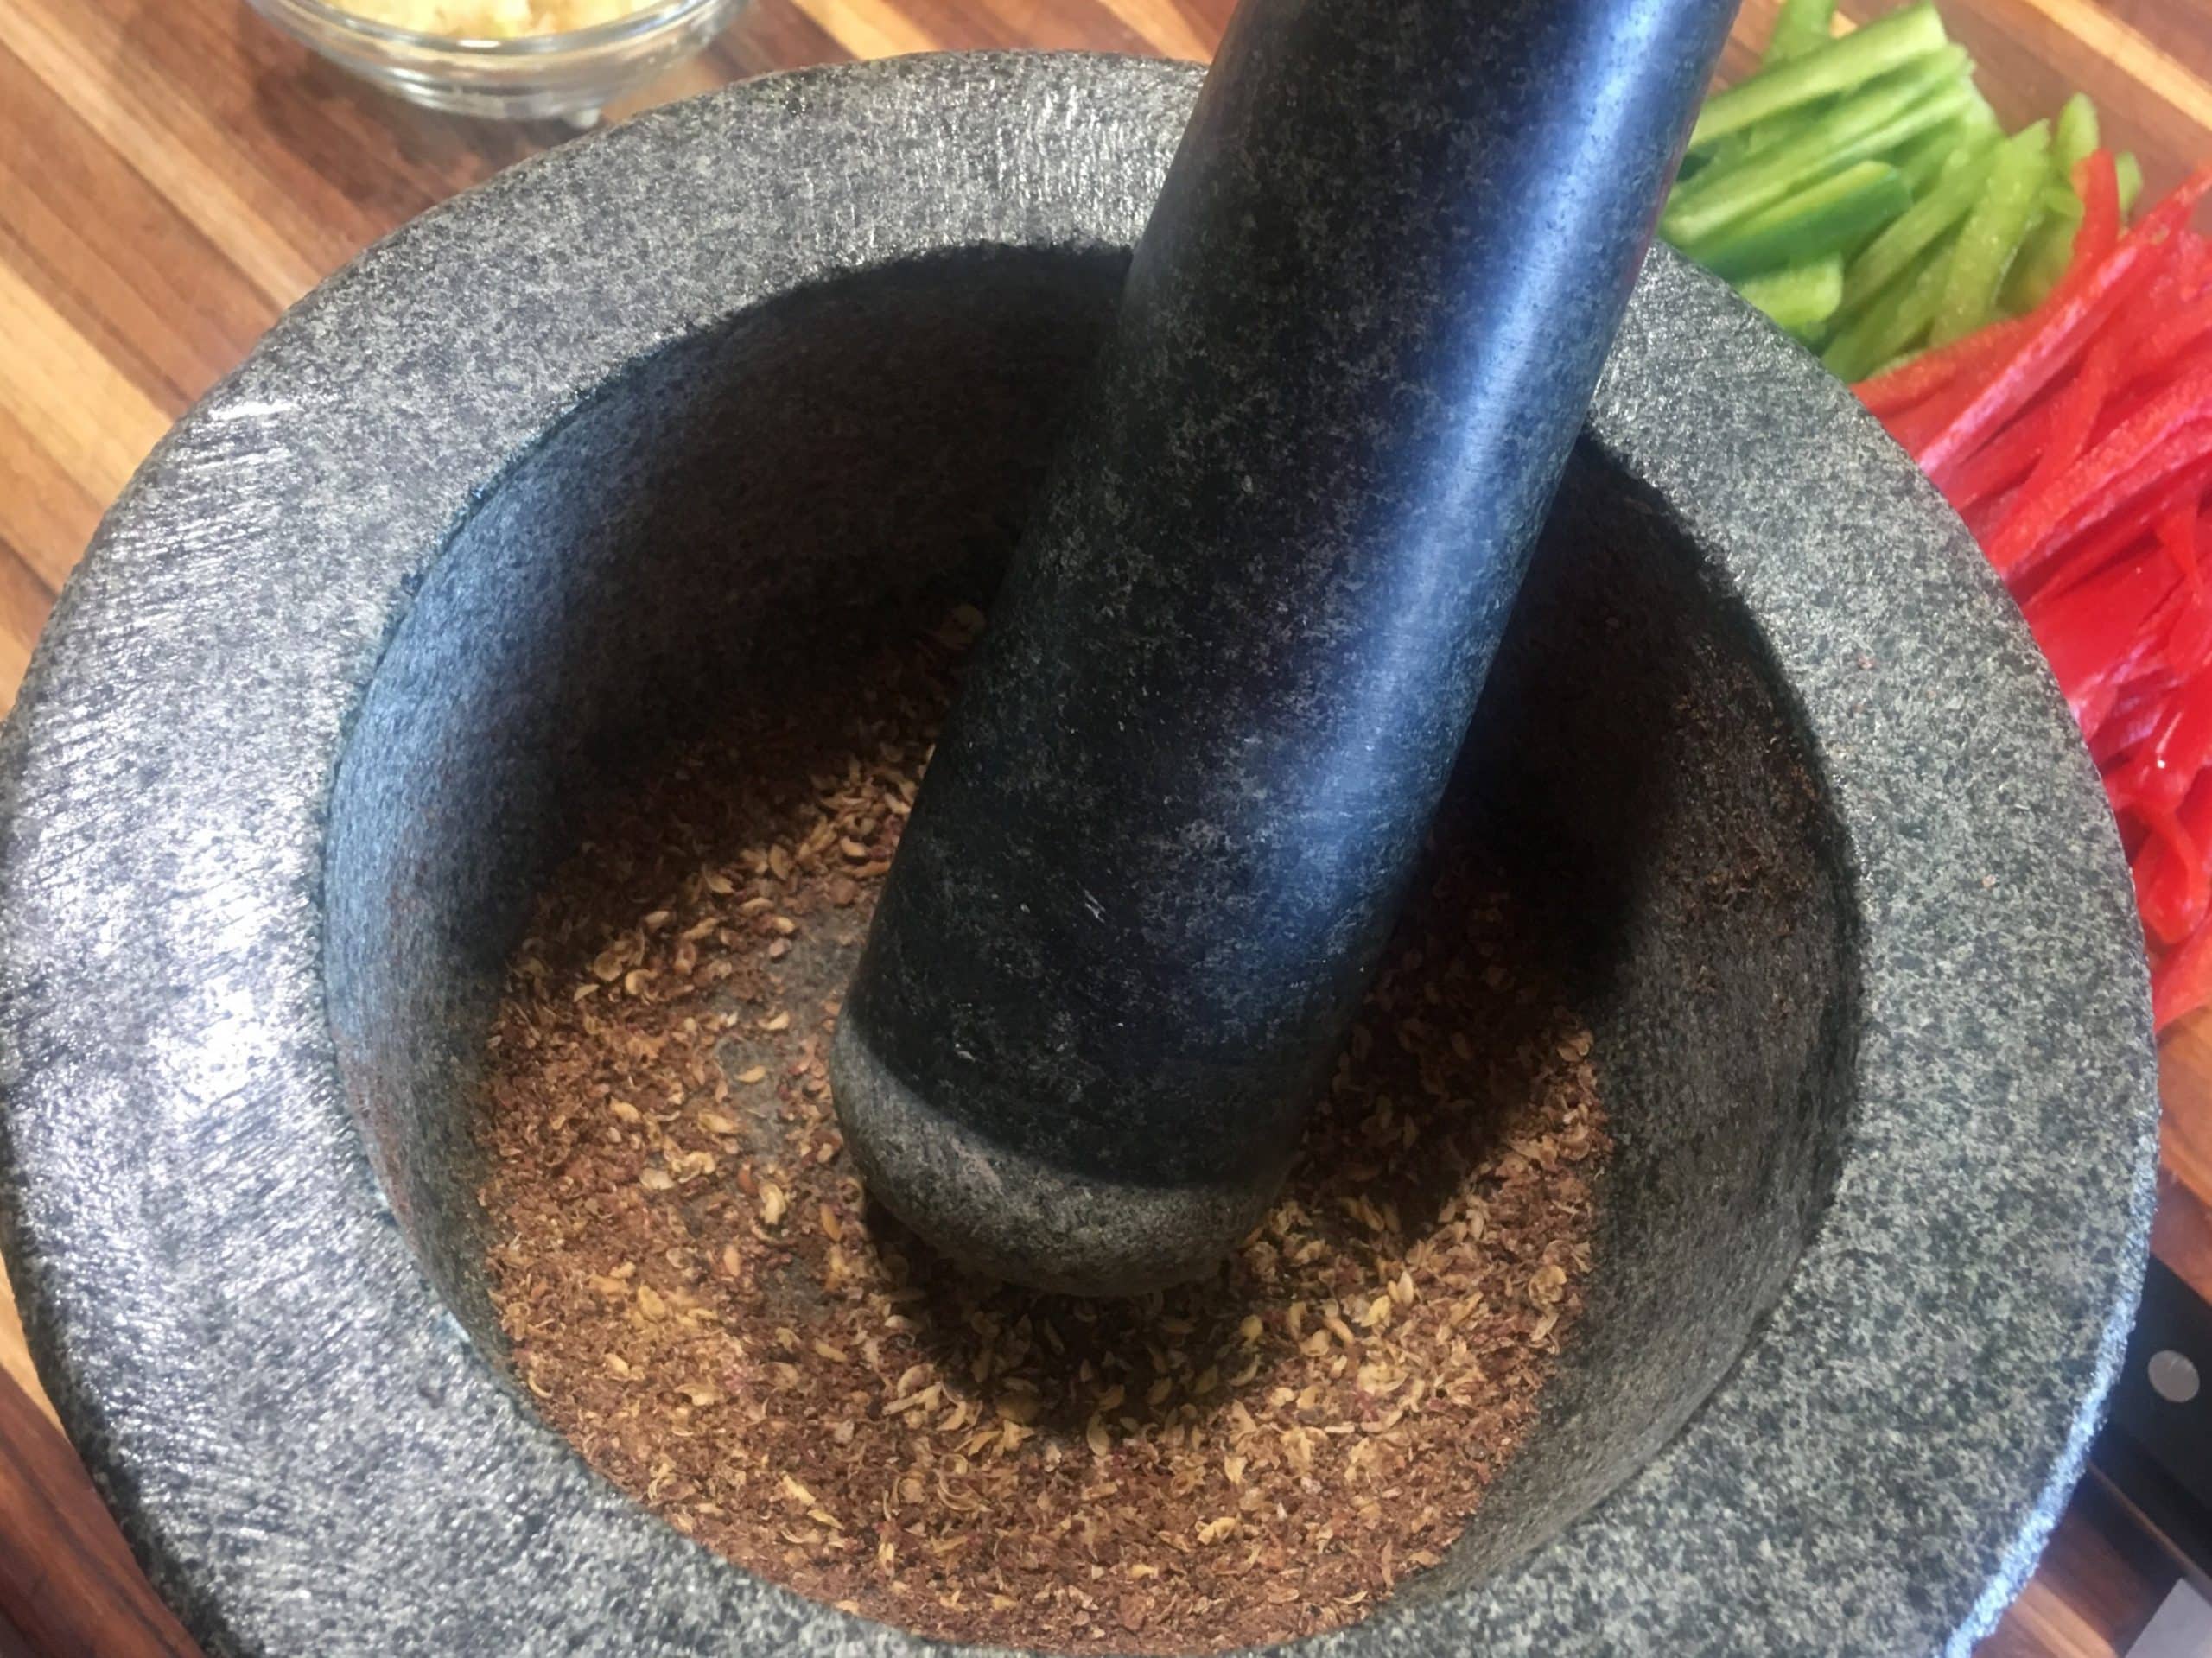 Grinding Szechuan peppercorns with a mortar and pestle for Calgary Ginger Beef.